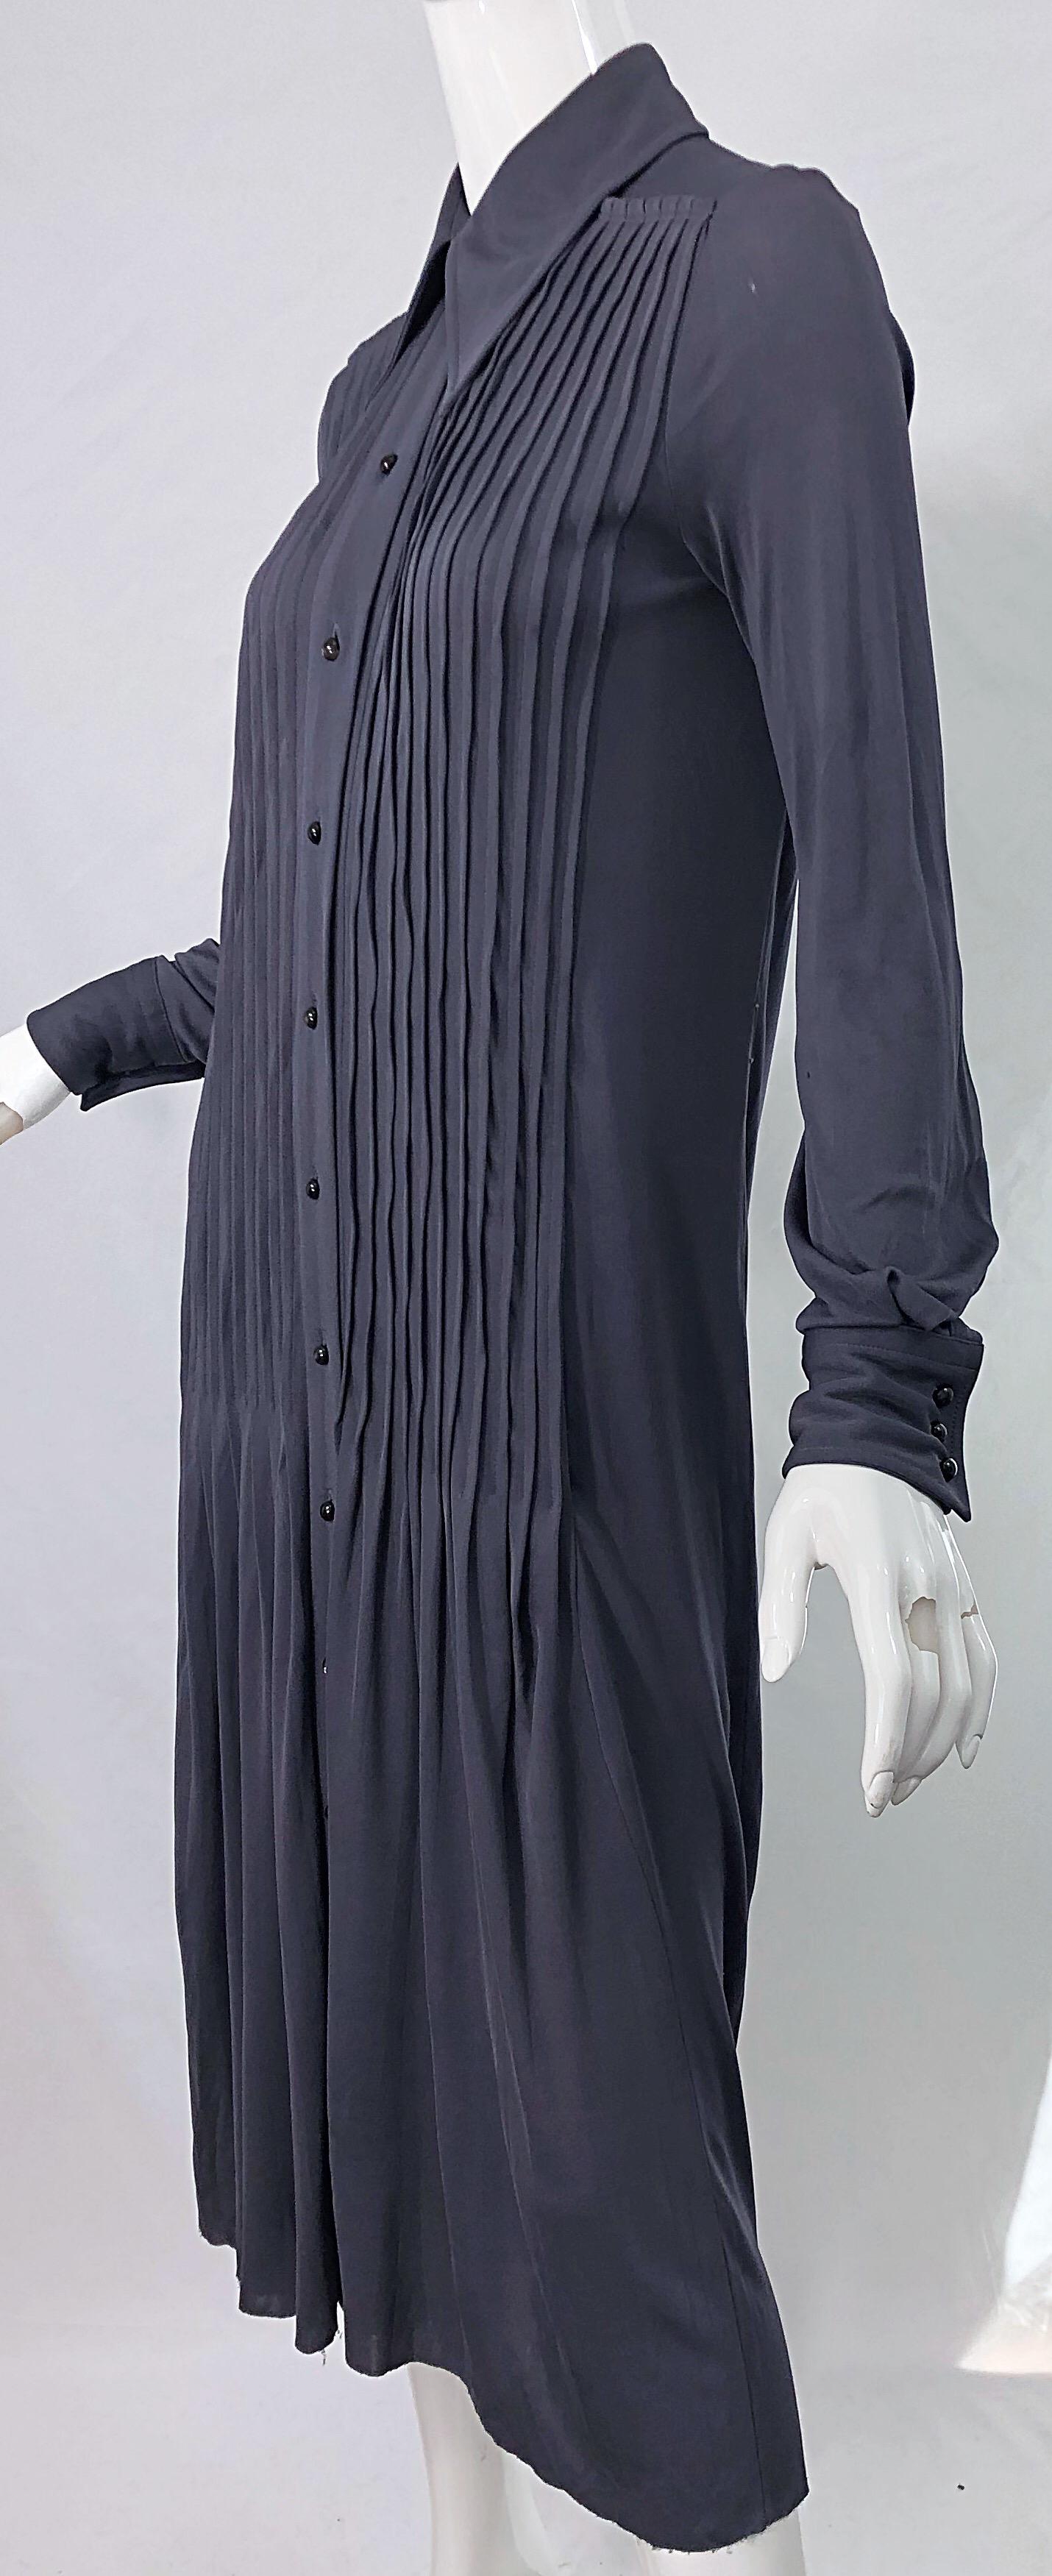 Women's Marc Jacobs for Bergdorf Goodman 1920s Flapper Style Gray 20s Rayon Shirt Dress For Sale